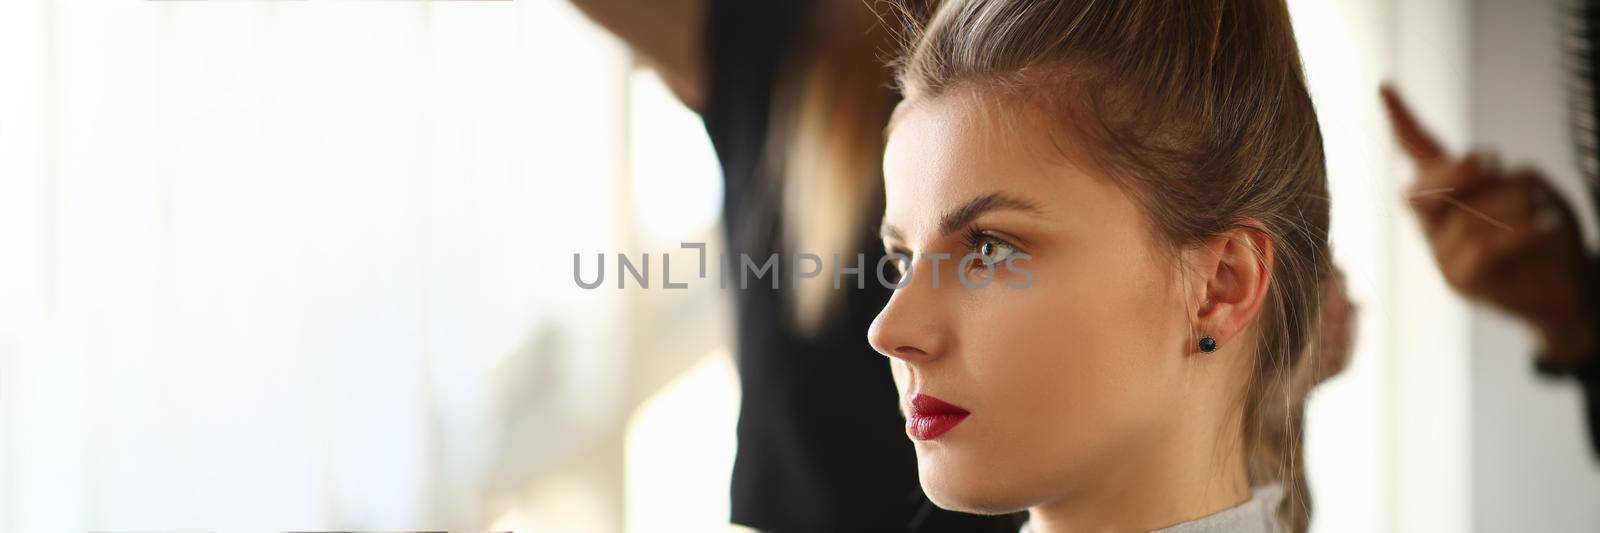 Portrait of a young woman at hairdresser. Beauty salon services and trendy haircuts concept